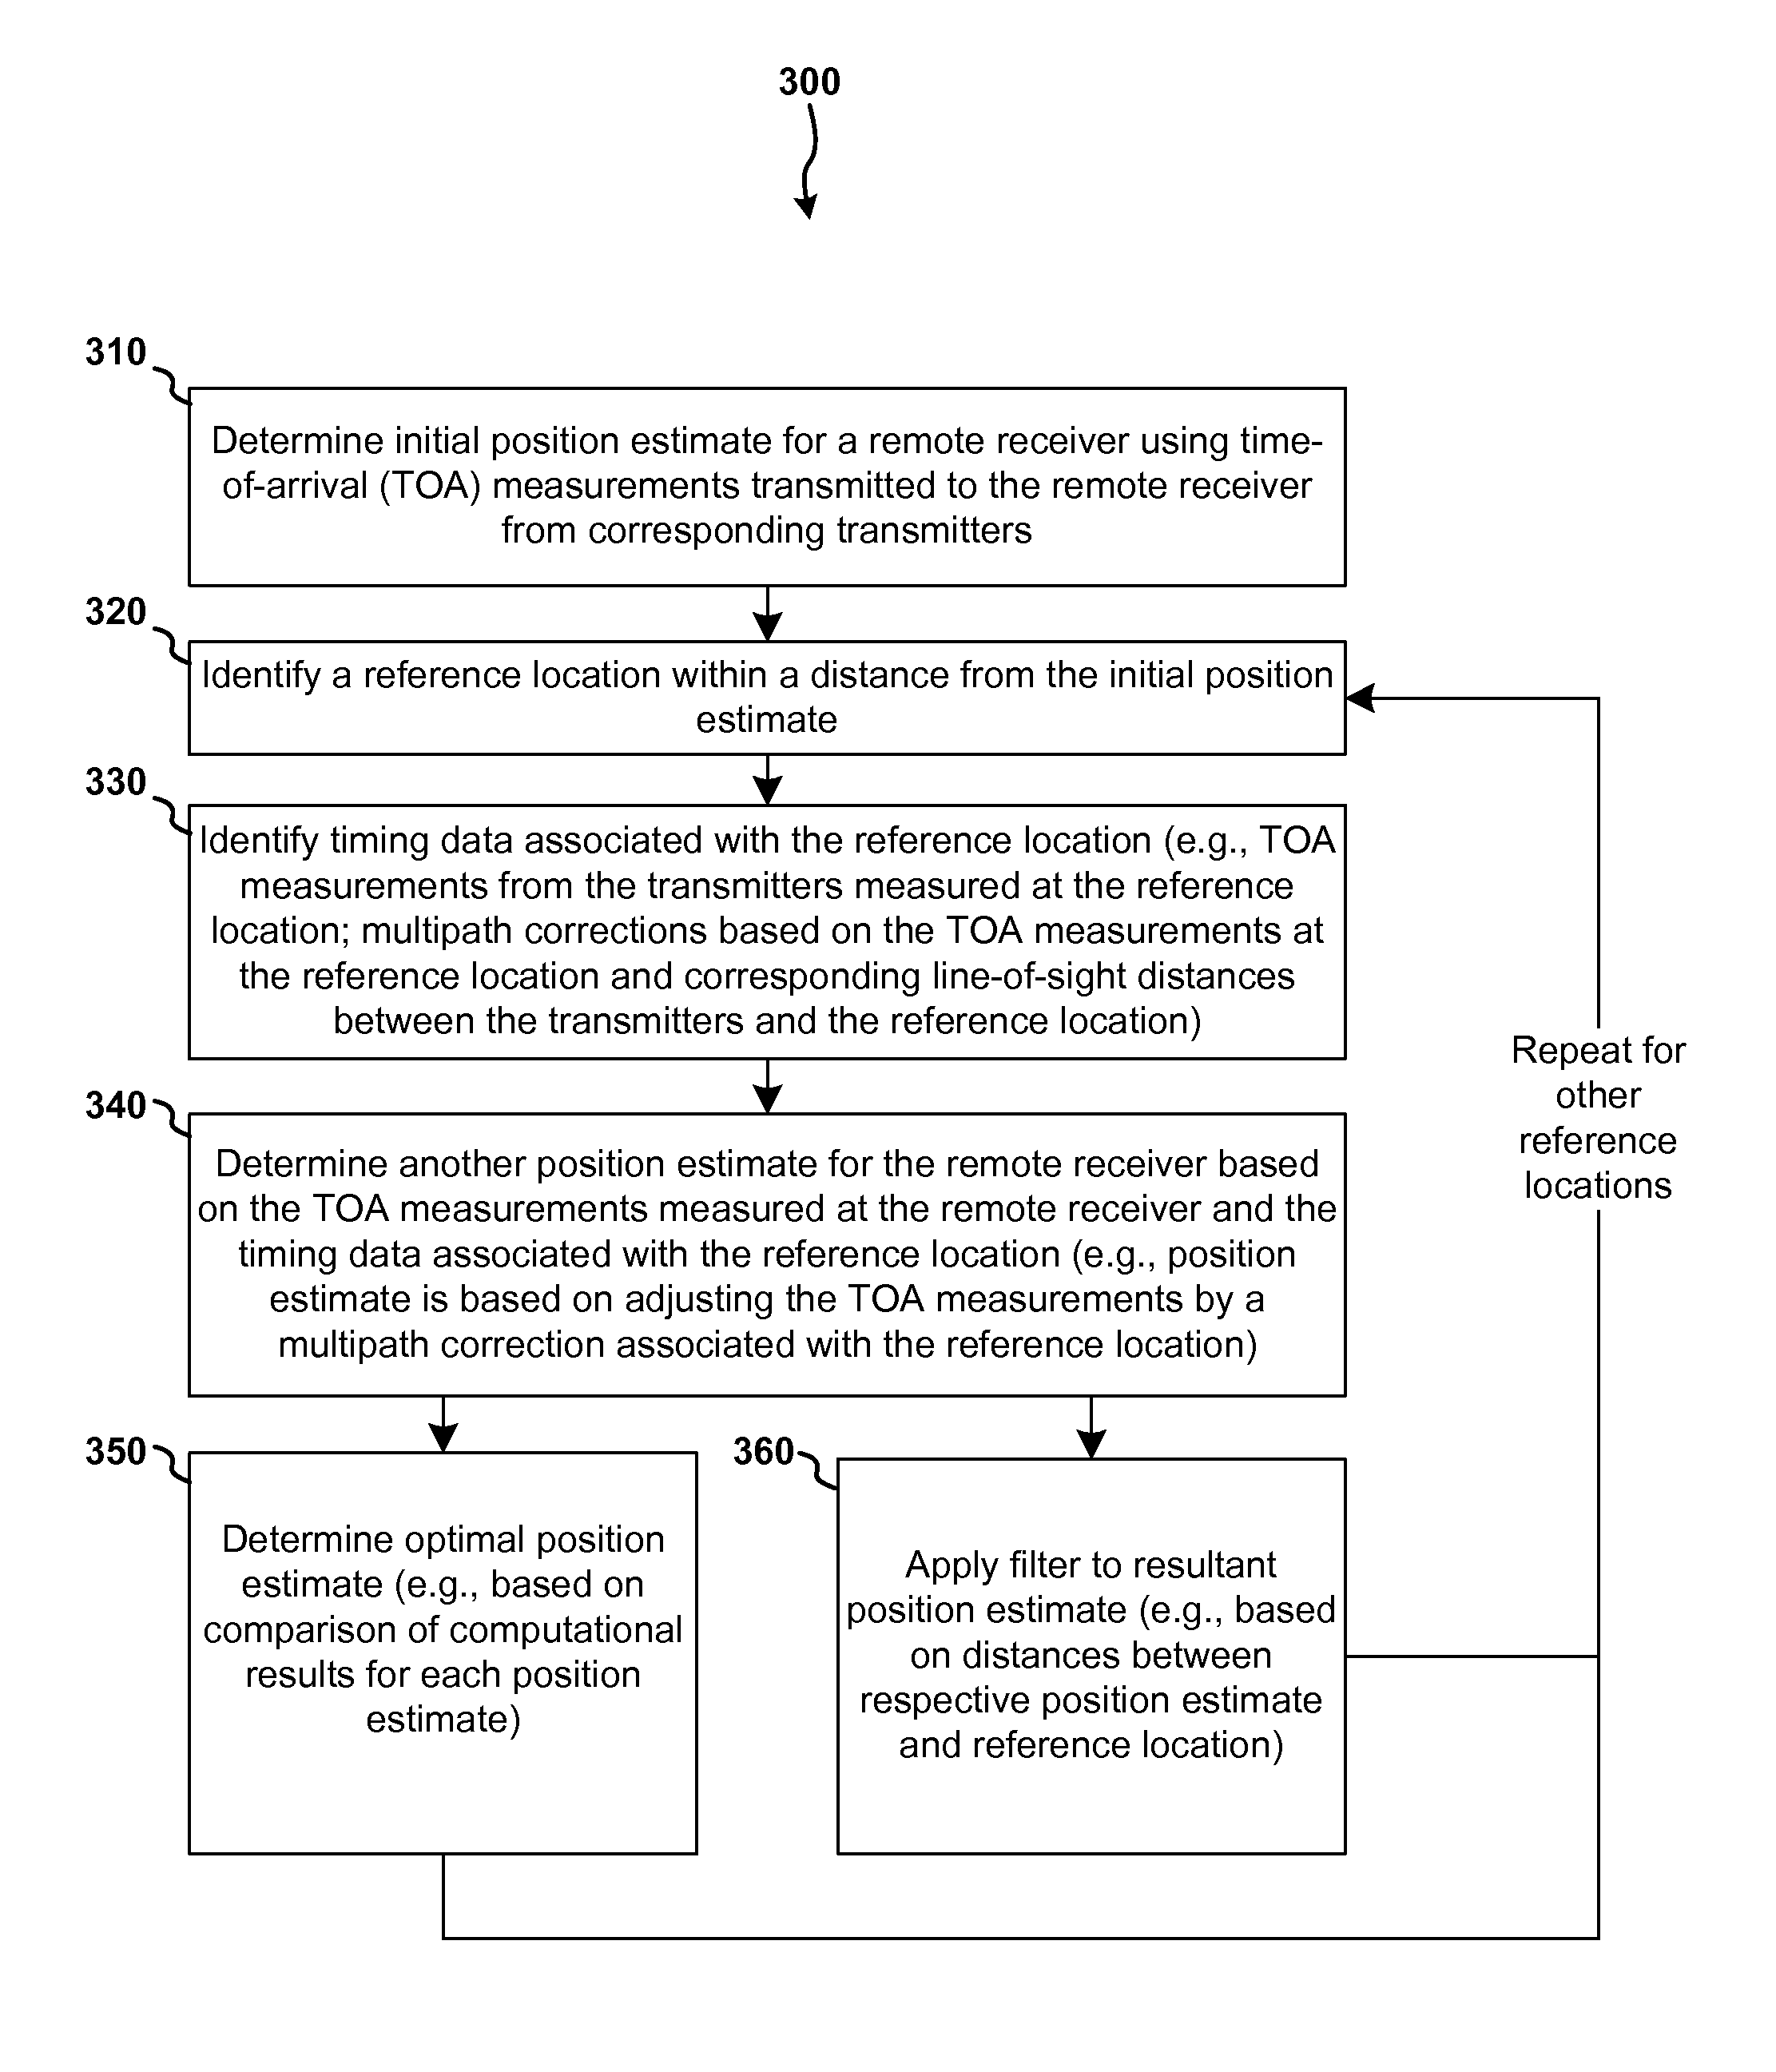 Systems and methods configured to estimate receiver position using timing data associated with reference locations in three-dimensional space